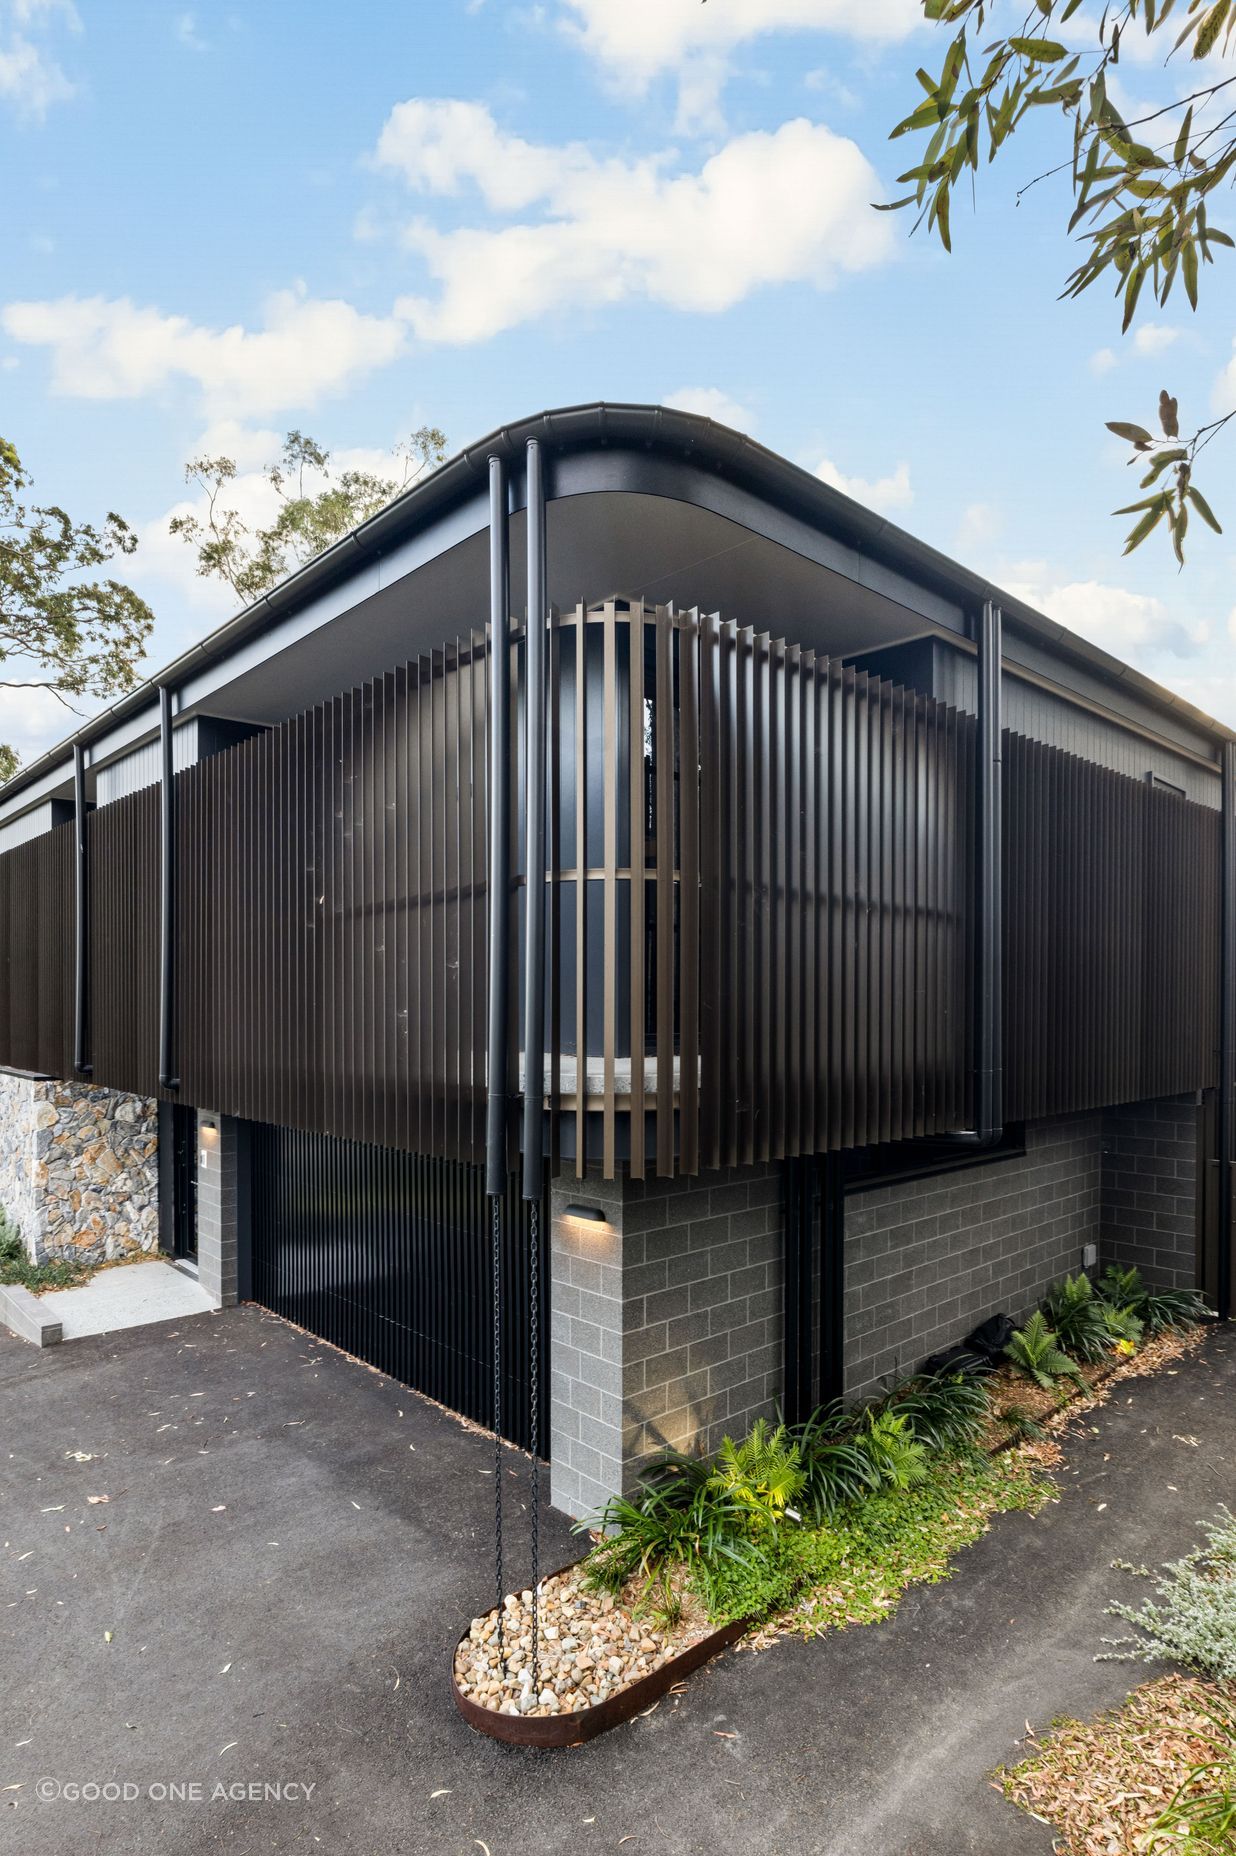 The form of the home avoids sharp lines, with the bronze coloured aluminium battens creating a soft, perforated.